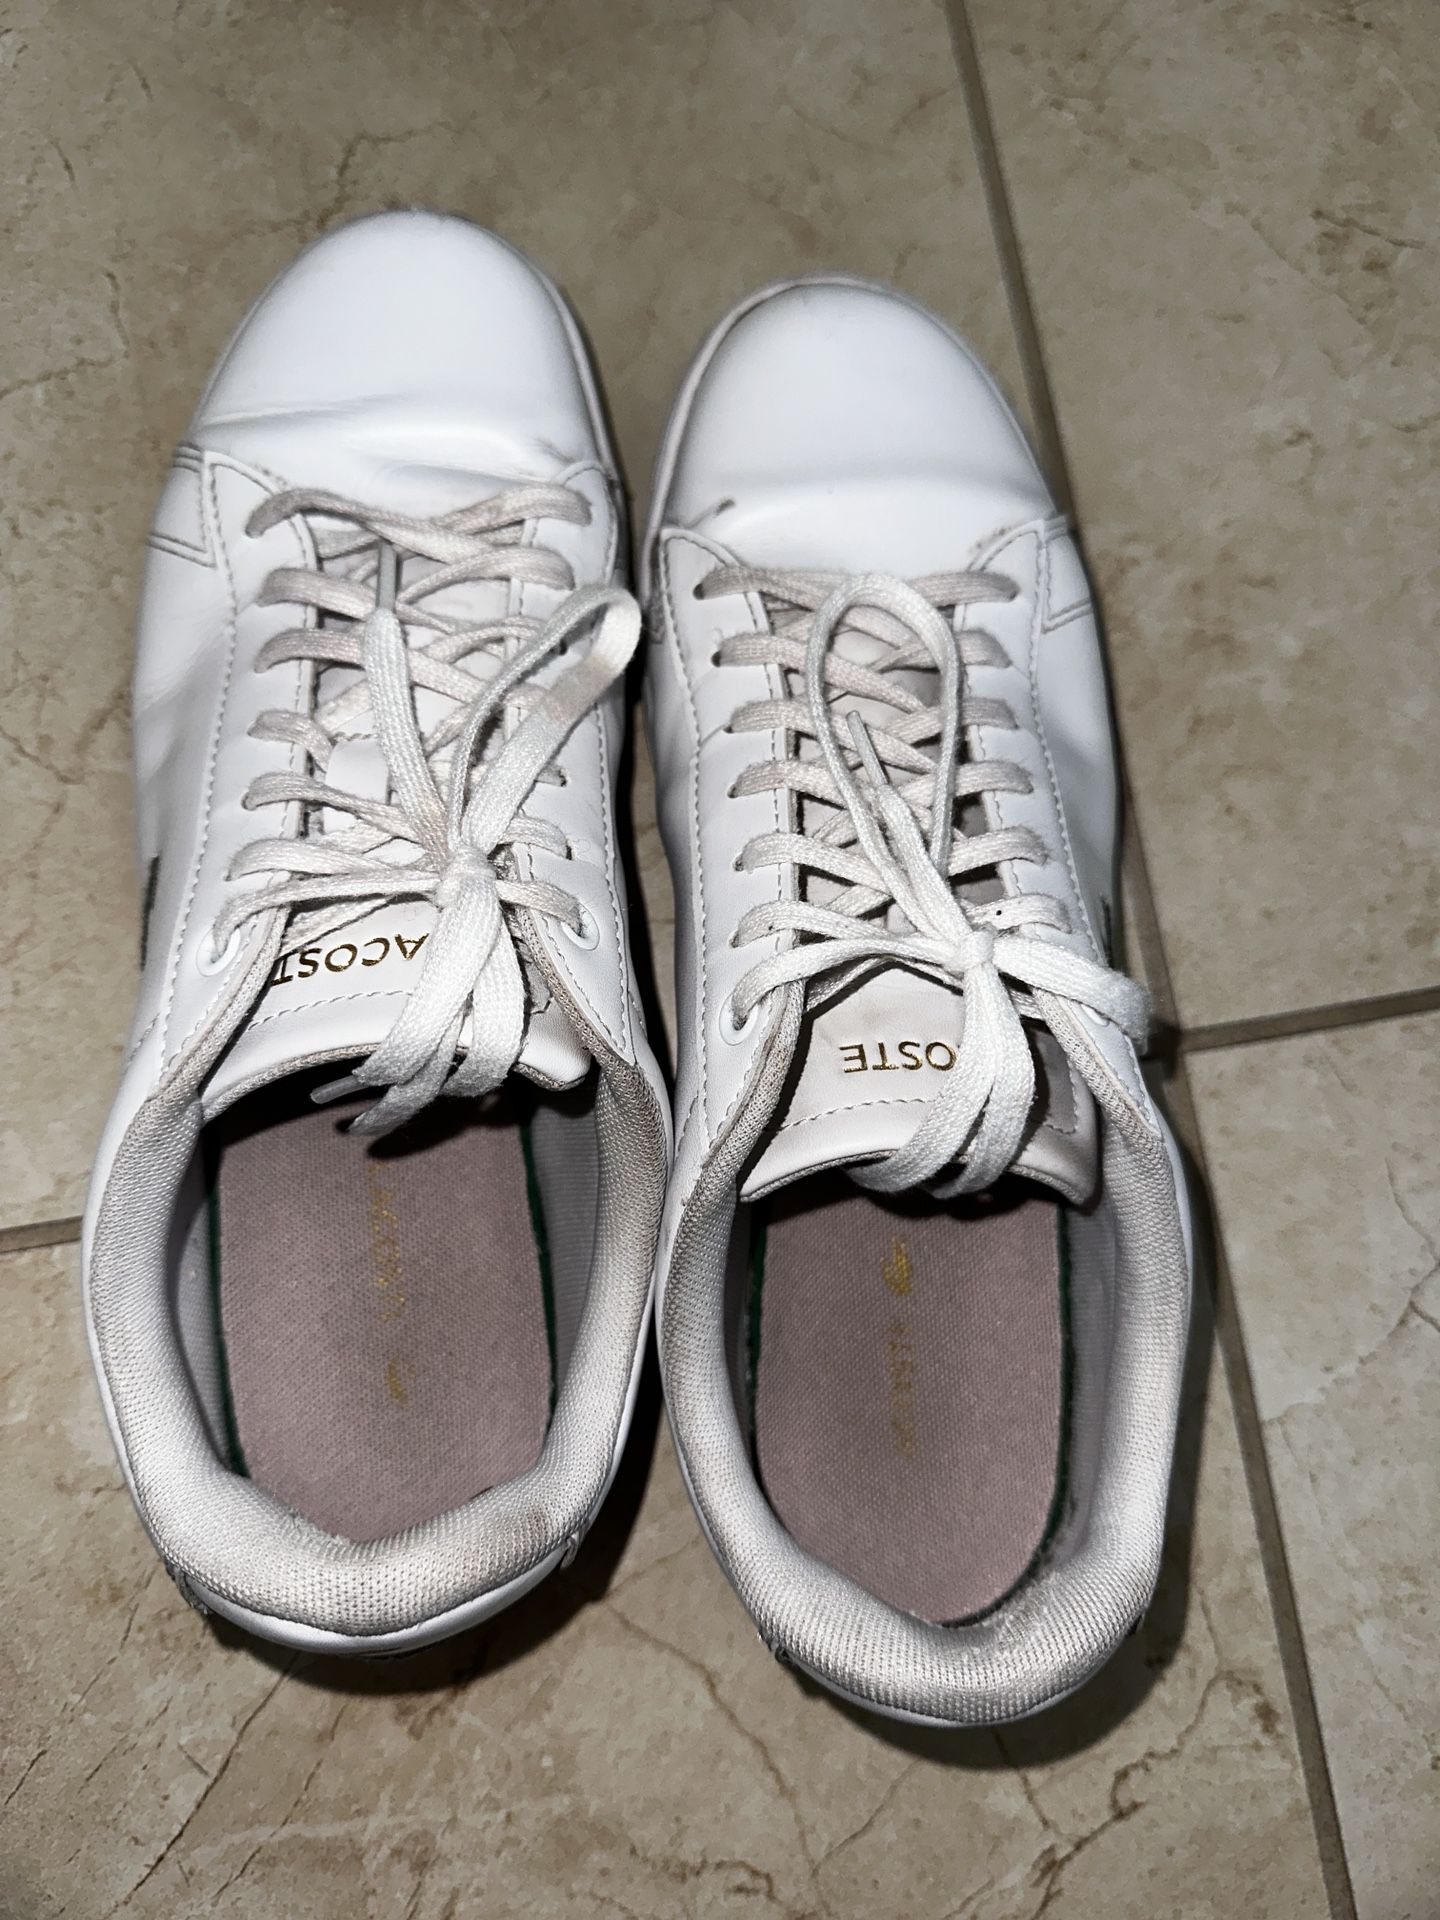 Original pre-owned LACOSTE Sneaker Men's Shoes WHITE 8.5 women 9.5. are signs of wear, please see pictures. Box for Sale in Las Vegas, NV -